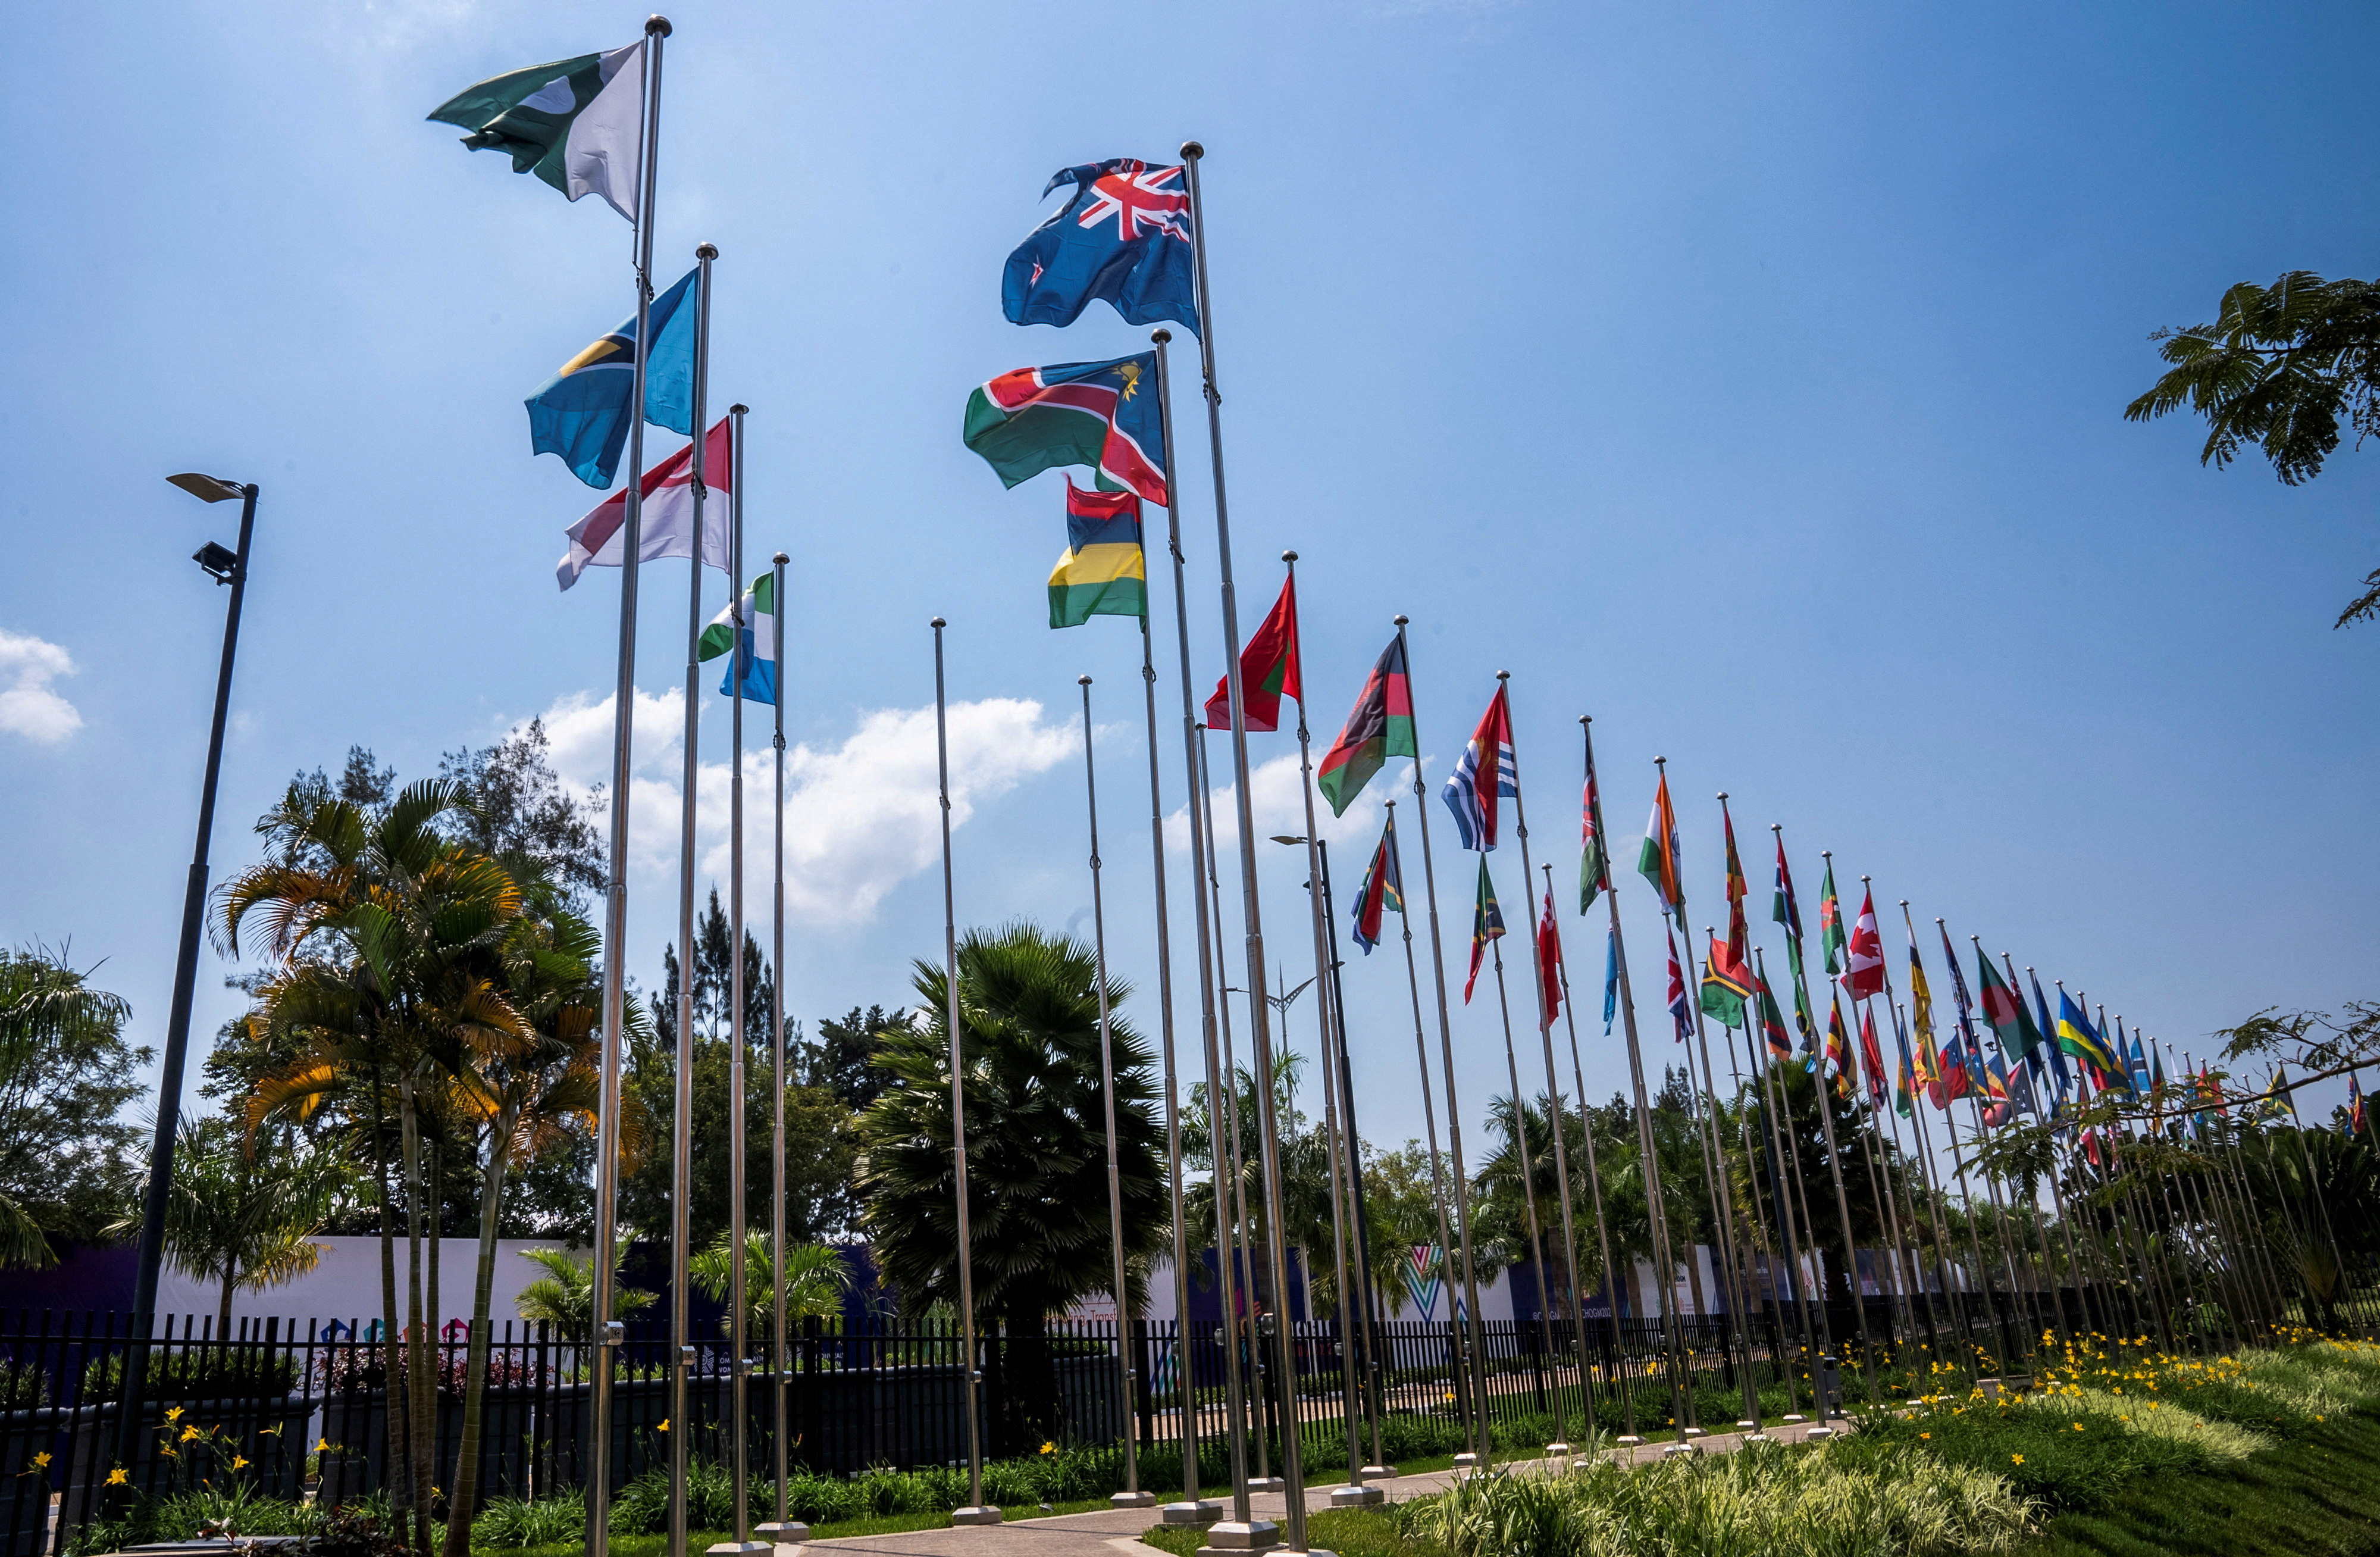 Flags representing Commonwealth countries fly at the Kigali Convention Centre, the venue hosting the Commonwealth Heads of Government Meeting in Kigali